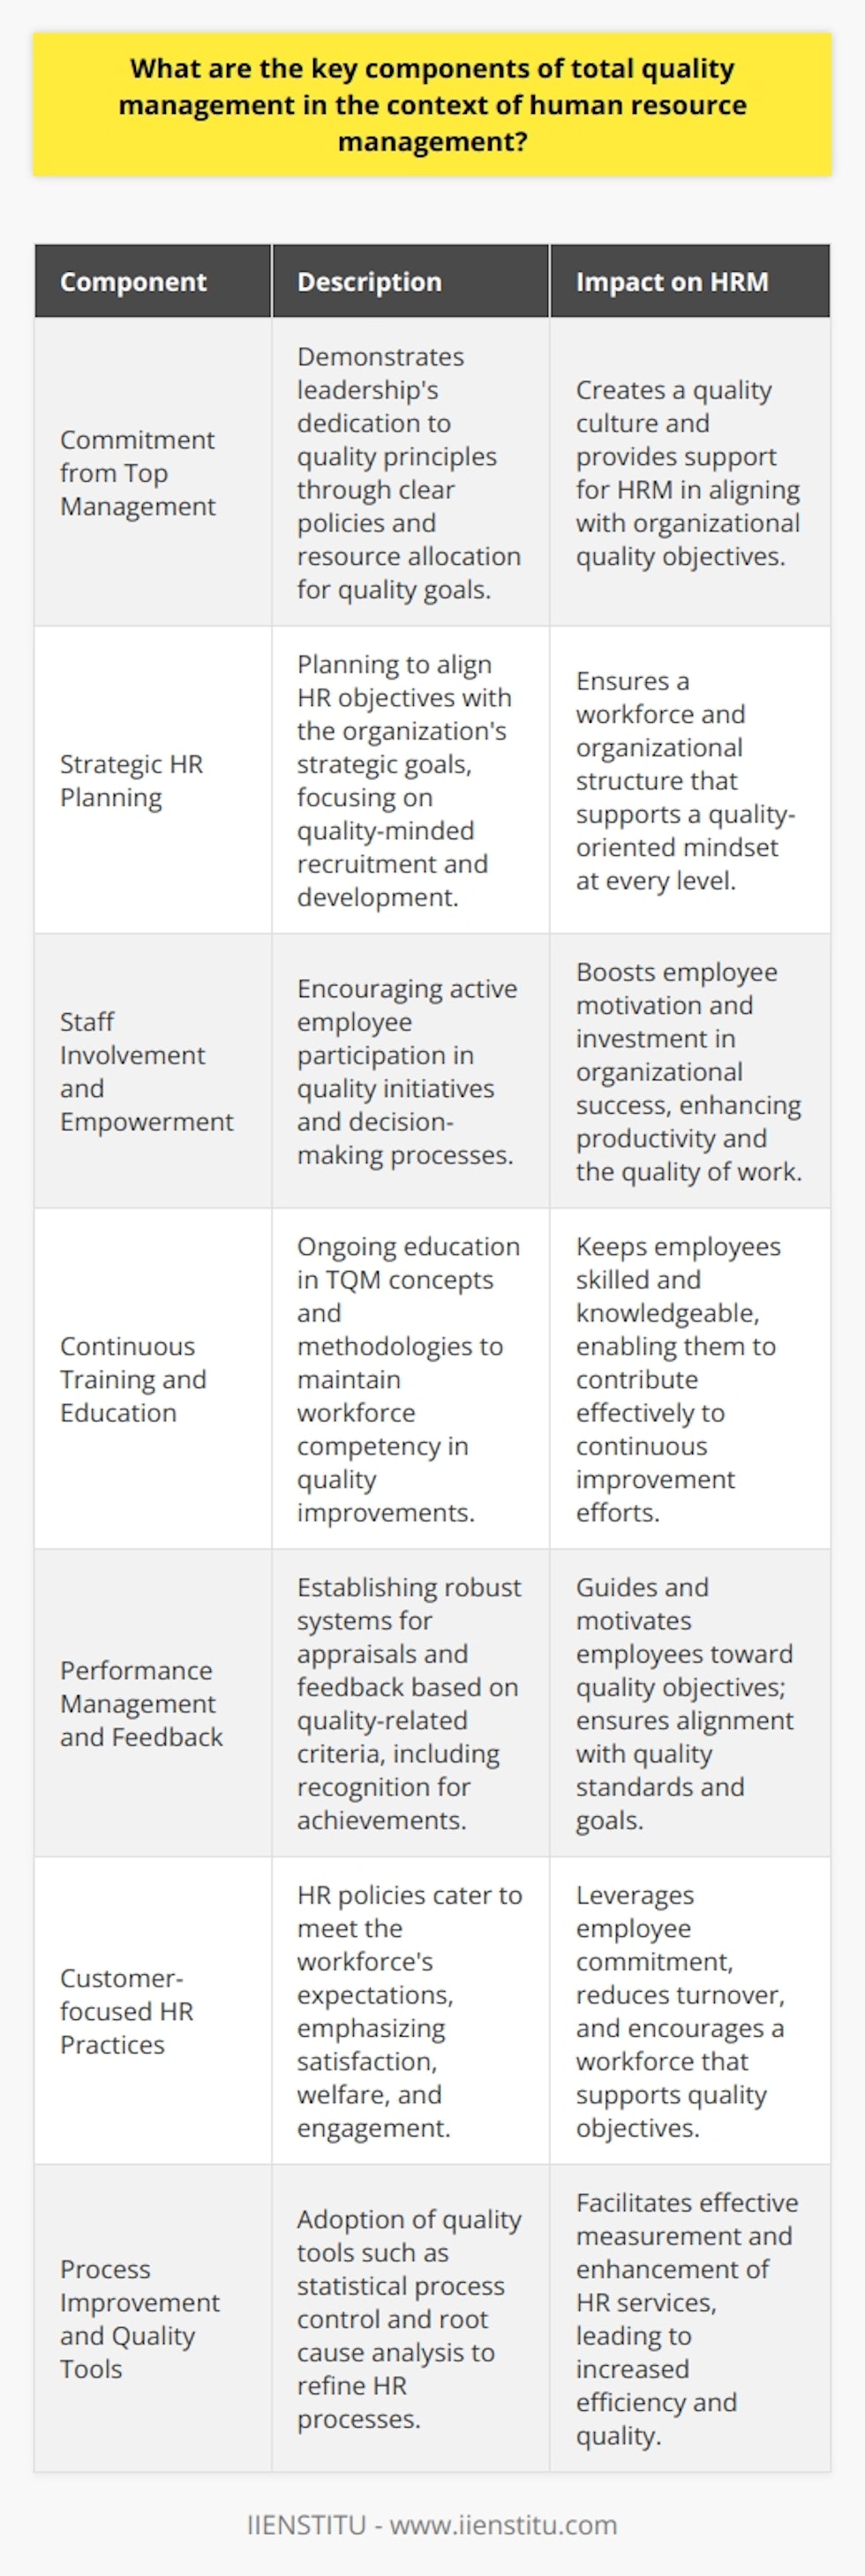 Total Quality Management (TQM) is a philosophy and framework that aims to instill a culture of continuous improvement within every aspect of an organization, including Human Resource Management (HRM). When applied to HRM, TQM focuses on enhancing the quality of the workforce and HR processes to contribute to the organization’s overarching goal of achieving high-quality products or services. The following are the key components of TQM within the context of HRM:Commitment from Top ManagementFor TQM to be effectively integrated into HRM, senior management must demonstrate a strong commitment to quality principles. This commitment should manifest in formulating clear policies, setting quality objectives, and leading by example. Management's role is to provide the necessary resources, training, and support to achieve the quality goals established. Their commitment is essential for fostering a quality culture throughout the organization.Strategic HR PlanningUnder TQM, HR planning aligns with the organization's strategic goals and quality objectives. The HR department must plan to recruit, retain, and develop employees who embody the values of TQM and can contribute to the organization's continuous improvement. This strategic approach ensures an organizational structure that supports a quality-oriented mindset at every level.Staff Involvement and EmpowermentIn a TQM-driven HRM approach, employees are active participants in quality initiatives. HR policies encourage staff empowerment, allowing them to take initiative, make decisions, and contribute their ideas to quality improvement processes. Empowered employees are more motivated and invested in the success of the organization, which can lead to higher productivity and quality of work.Continuous Training and EducationHRM under TQM emphasizes the importance of ongoing employee education and training. Continuous learning ensures employees are competent in TQM concepts and methodologies such as process management, problem-solving techniques, and customer focus. A well-designed training program adapts to the changing needs of the employees and the organization, fostering a proactive approach to skill development.Performance Management and FeedbackEffective performance management systems are paramount in TQM-oriented HRM. Performance appraisals should be regular, constructive, and based on criteria that reflect quality objectives. In addition to performance evaluations, continuous feedback mechanisms help employees understand how their work affects quality and what improvements can be made. Recognition and rewards for quality achievements are also part of a comprehensive performance management strategy, reinforcing the value of high-quality standards.Customer-focused HR PracticesJust as TQM focuses on external customers, HRM should apply the same principles to its internal customers— the organization's employees. HR policies and practices should aim to meet or exceed the expectations of the workforce, with a strong emphasis on employee satisfaction, welfare, and engagement. When HR treats employees as valued customers, it can lead to enhanced commitment, lower turnover, and a workforce that actively contributes to the organization's quality goals.Process Improvement and Quality ToolsHR departments implementing TQM equip themselves with quality tools and techniques such as statistical process control, benchmarking, and root cause analysis. These tools enable the HRM team to measure, analyze, and improve HR processes like recruitment, onboarding, training, and development programs. By employing these tools, HR can identify inefficiencies and work towards streamlining processes, enhancing the quality of HR services.In sum, the successful integration of TQM into HRM involves the commitment of top management, strategic HR planning, employee involvement and empowerment, continuous training, robust performance management, a focus on internal customer satisfaction, and the utilization of quality tools for process improvement. These components help ensure that HRM is a strategic partner in achieving excellence and driving the organization's overall quality mission.